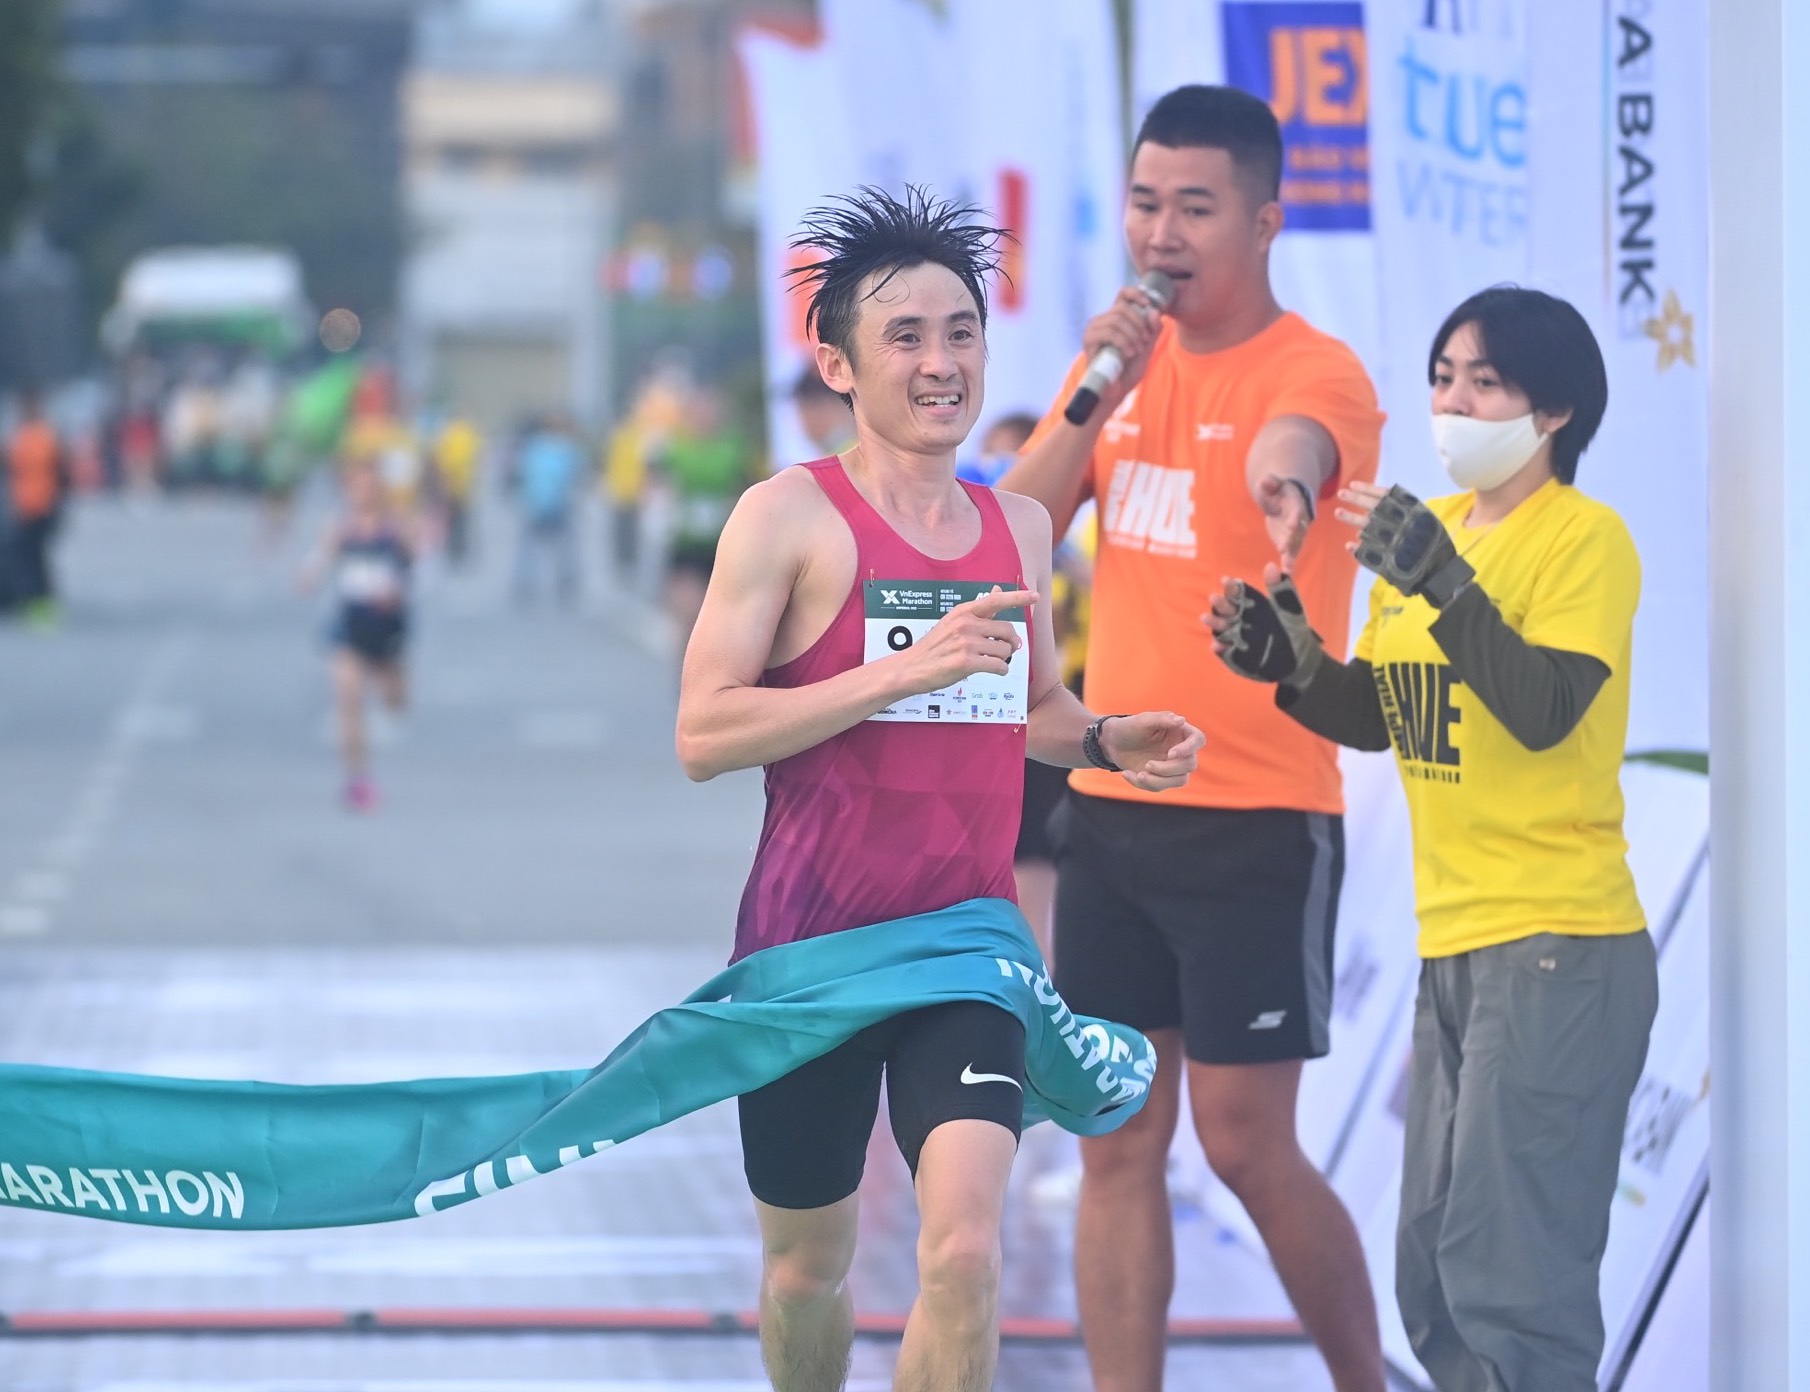 Bui The Anh (L) finishes first among men in the full marathon at VM Hue, April 10, 2022. Photo by VnExpress